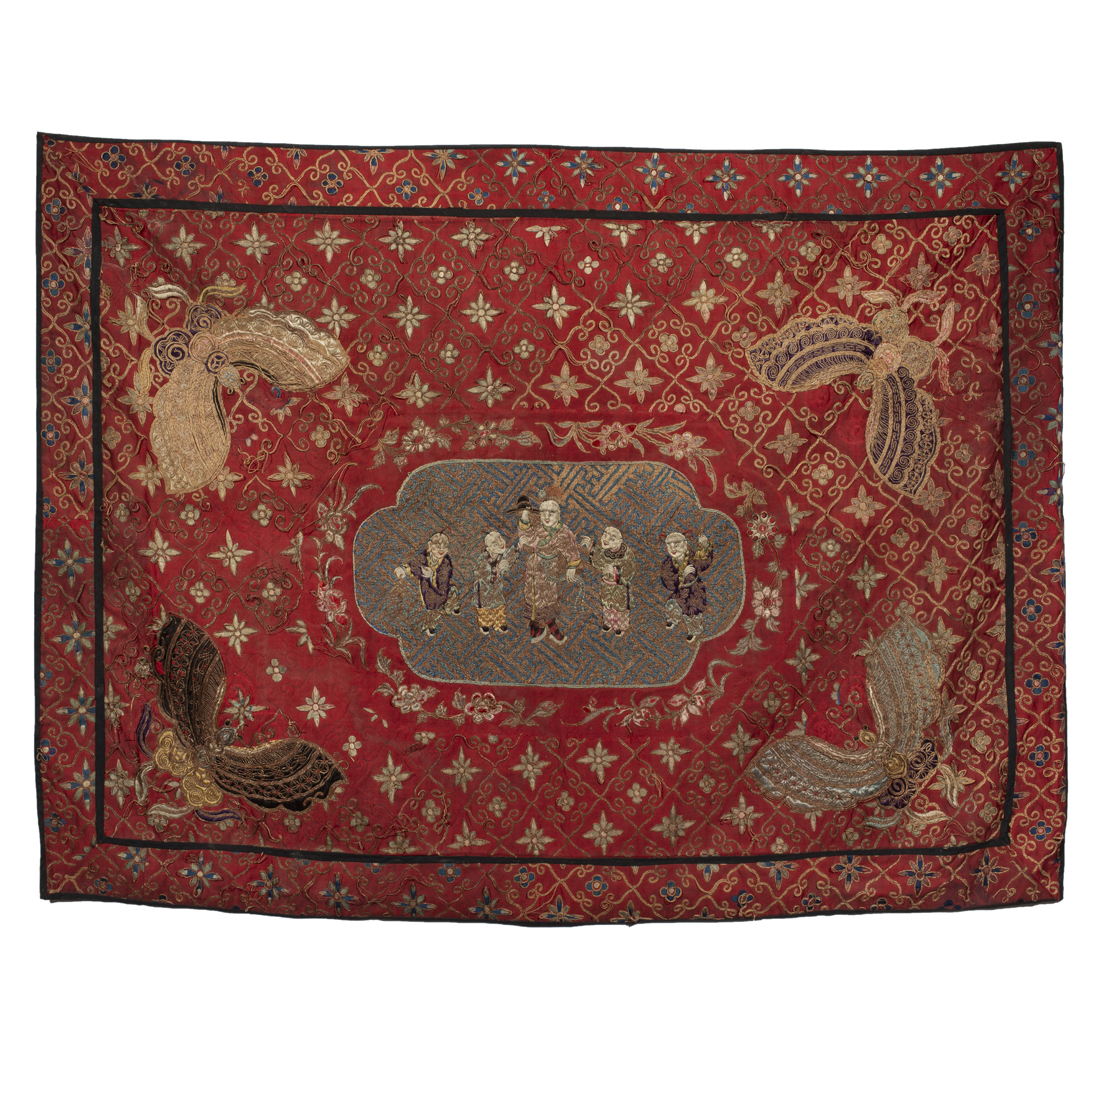 CHINESE EMBROIDERED RED GROUND 3ce484